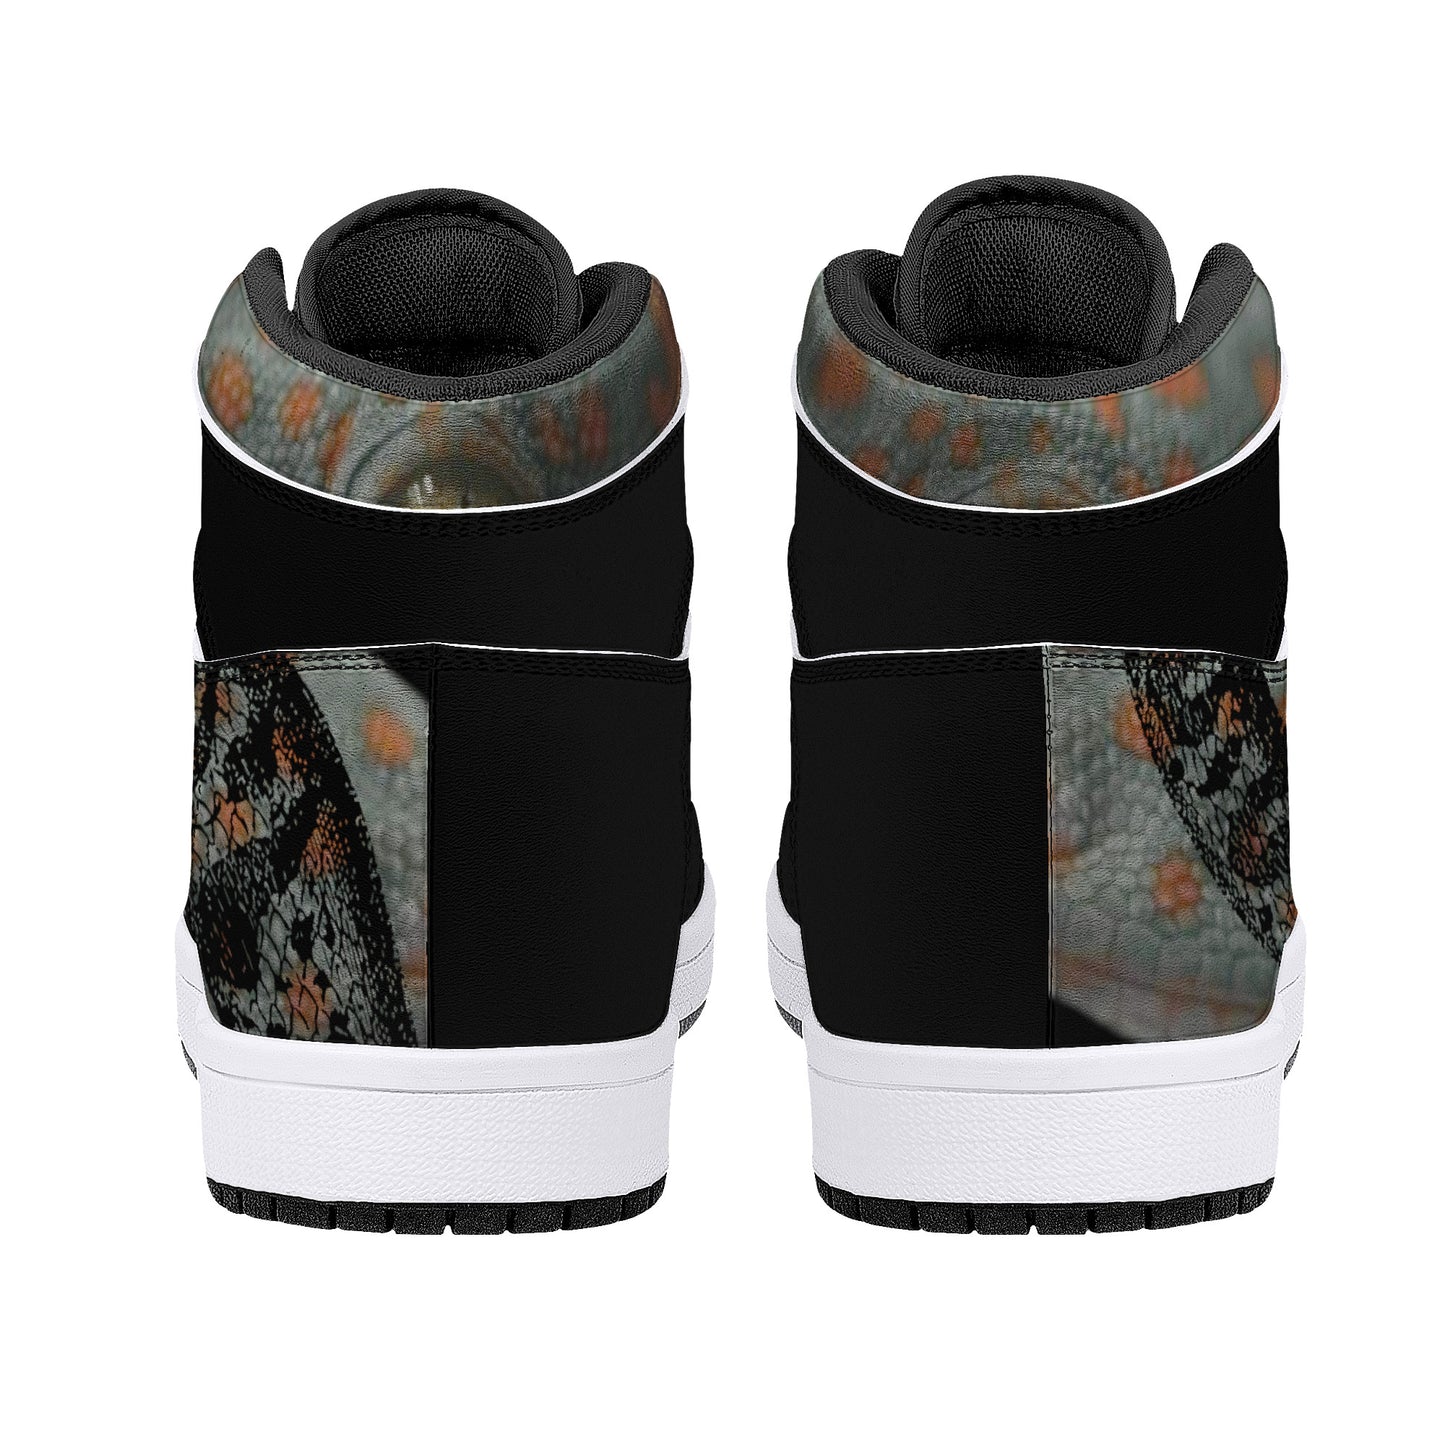 Gecko Grounds SG High-top Sneakers